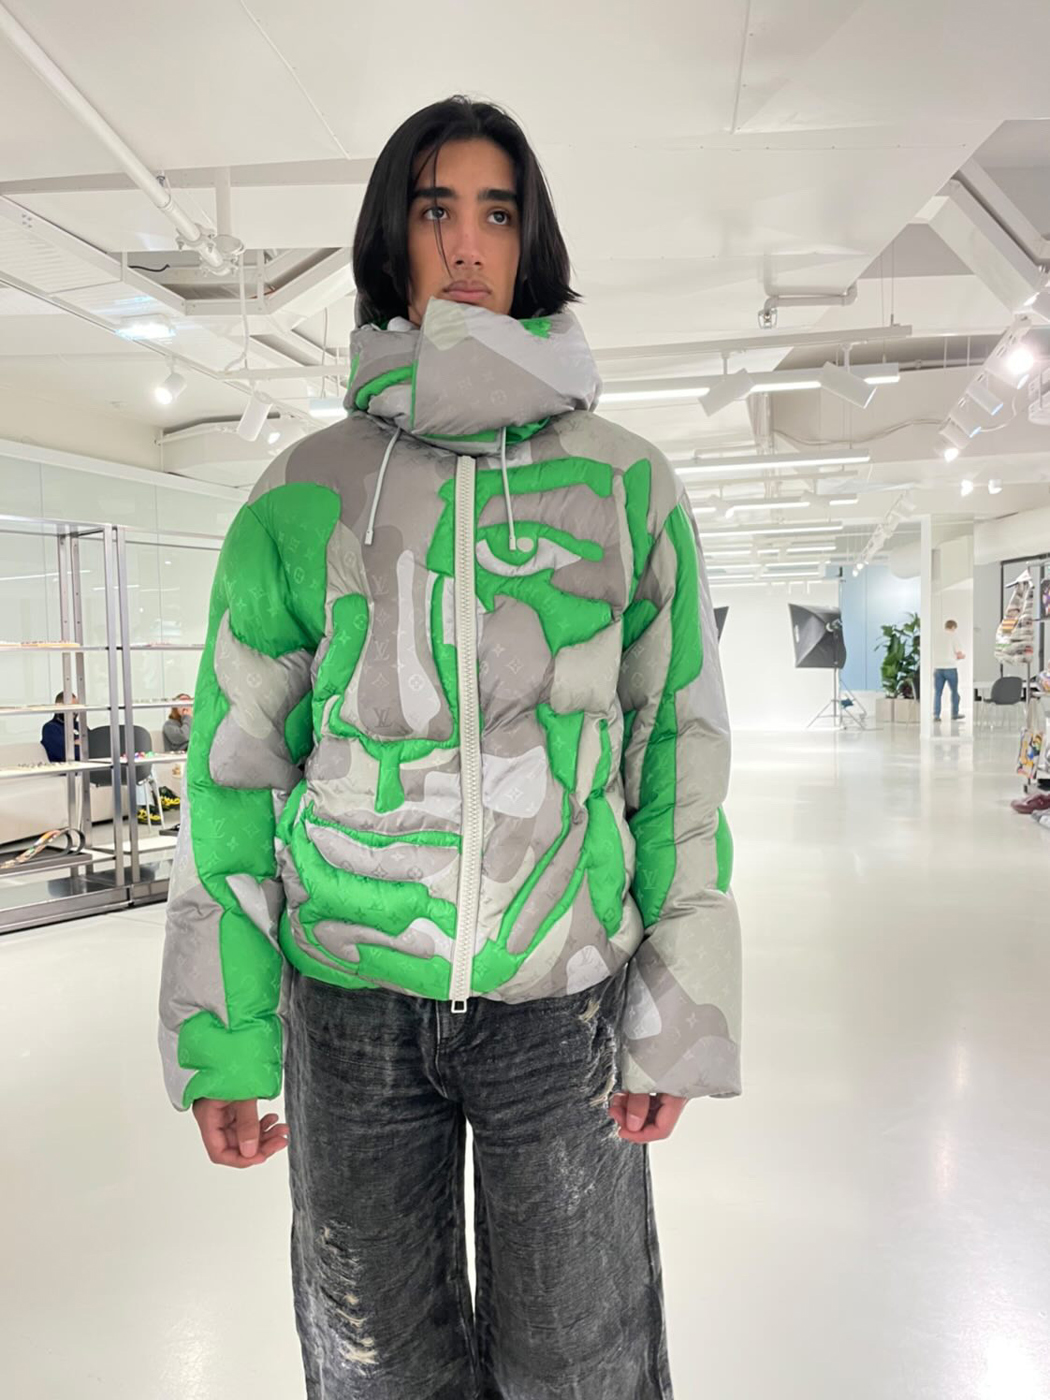 Louis Vuitton Enlists KidSuper to Co-Create FW23 Menswear Collection